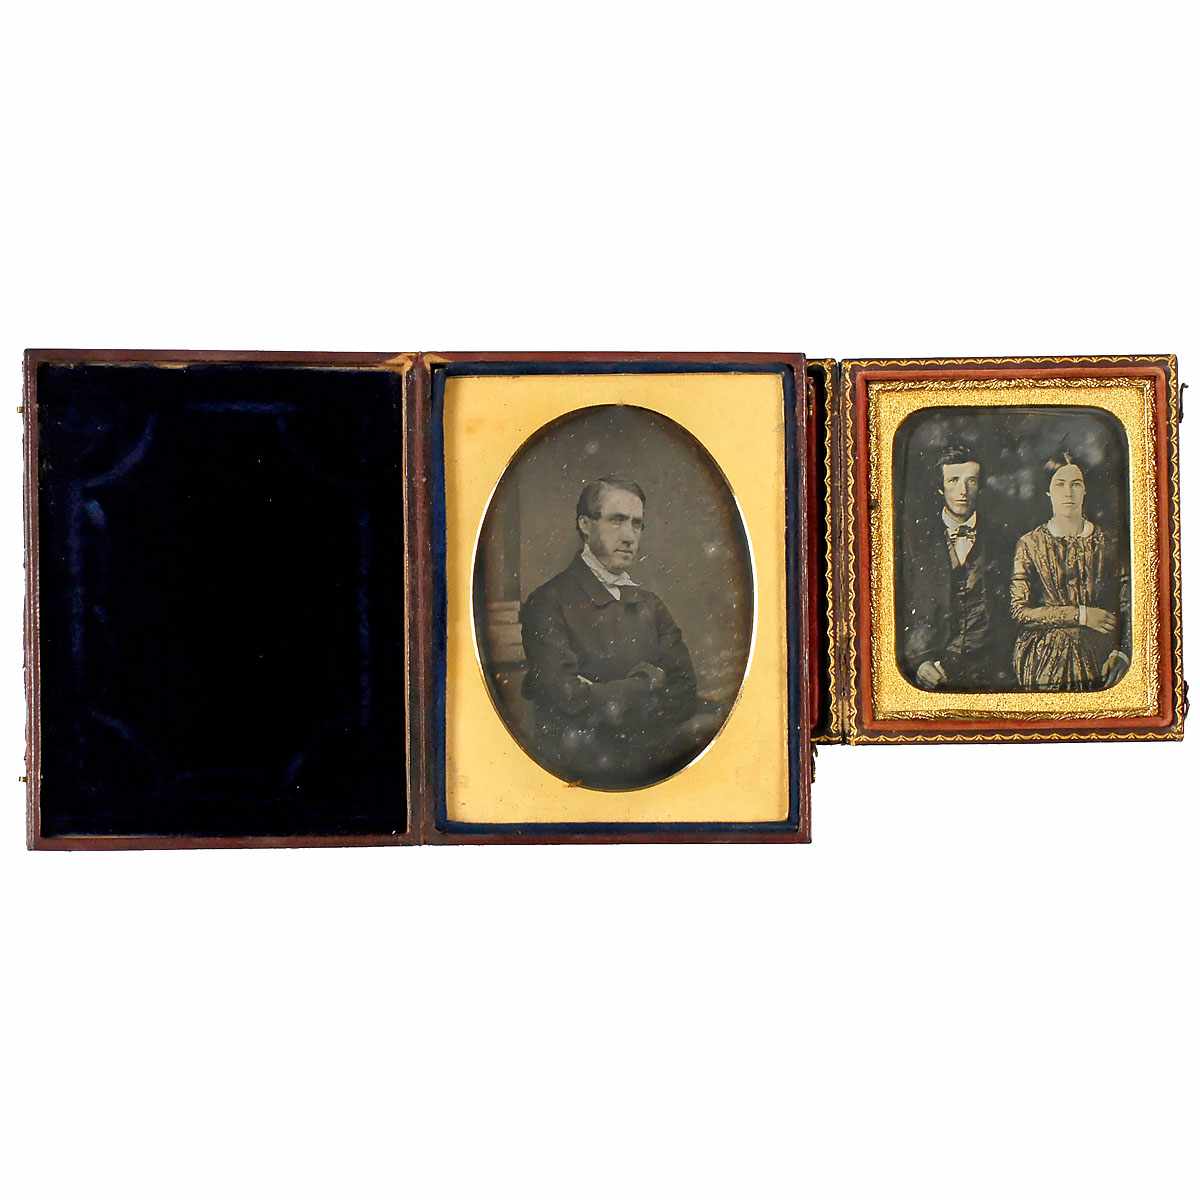 2 Daguerreotypes, c. 1845-50 1) Anonymous, c. 1845, 1/8 plate, couple, lightly hand-tinted, slightly